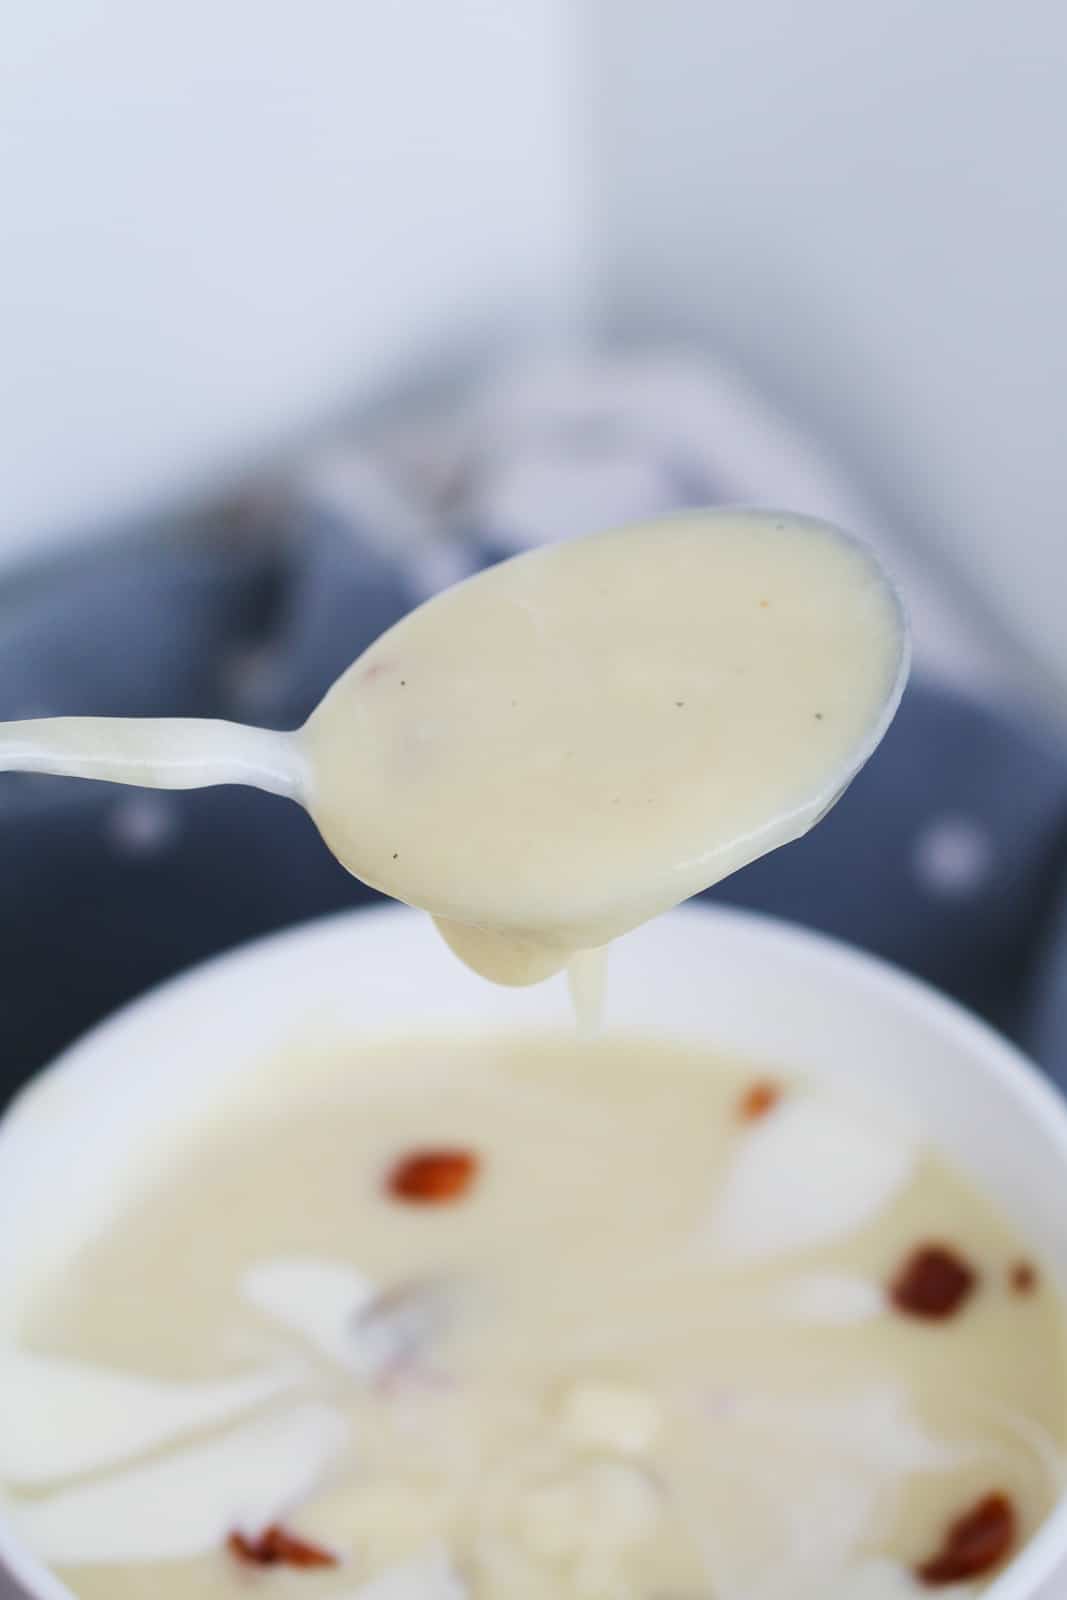 A soup spoon holding creamy vegetable soup.